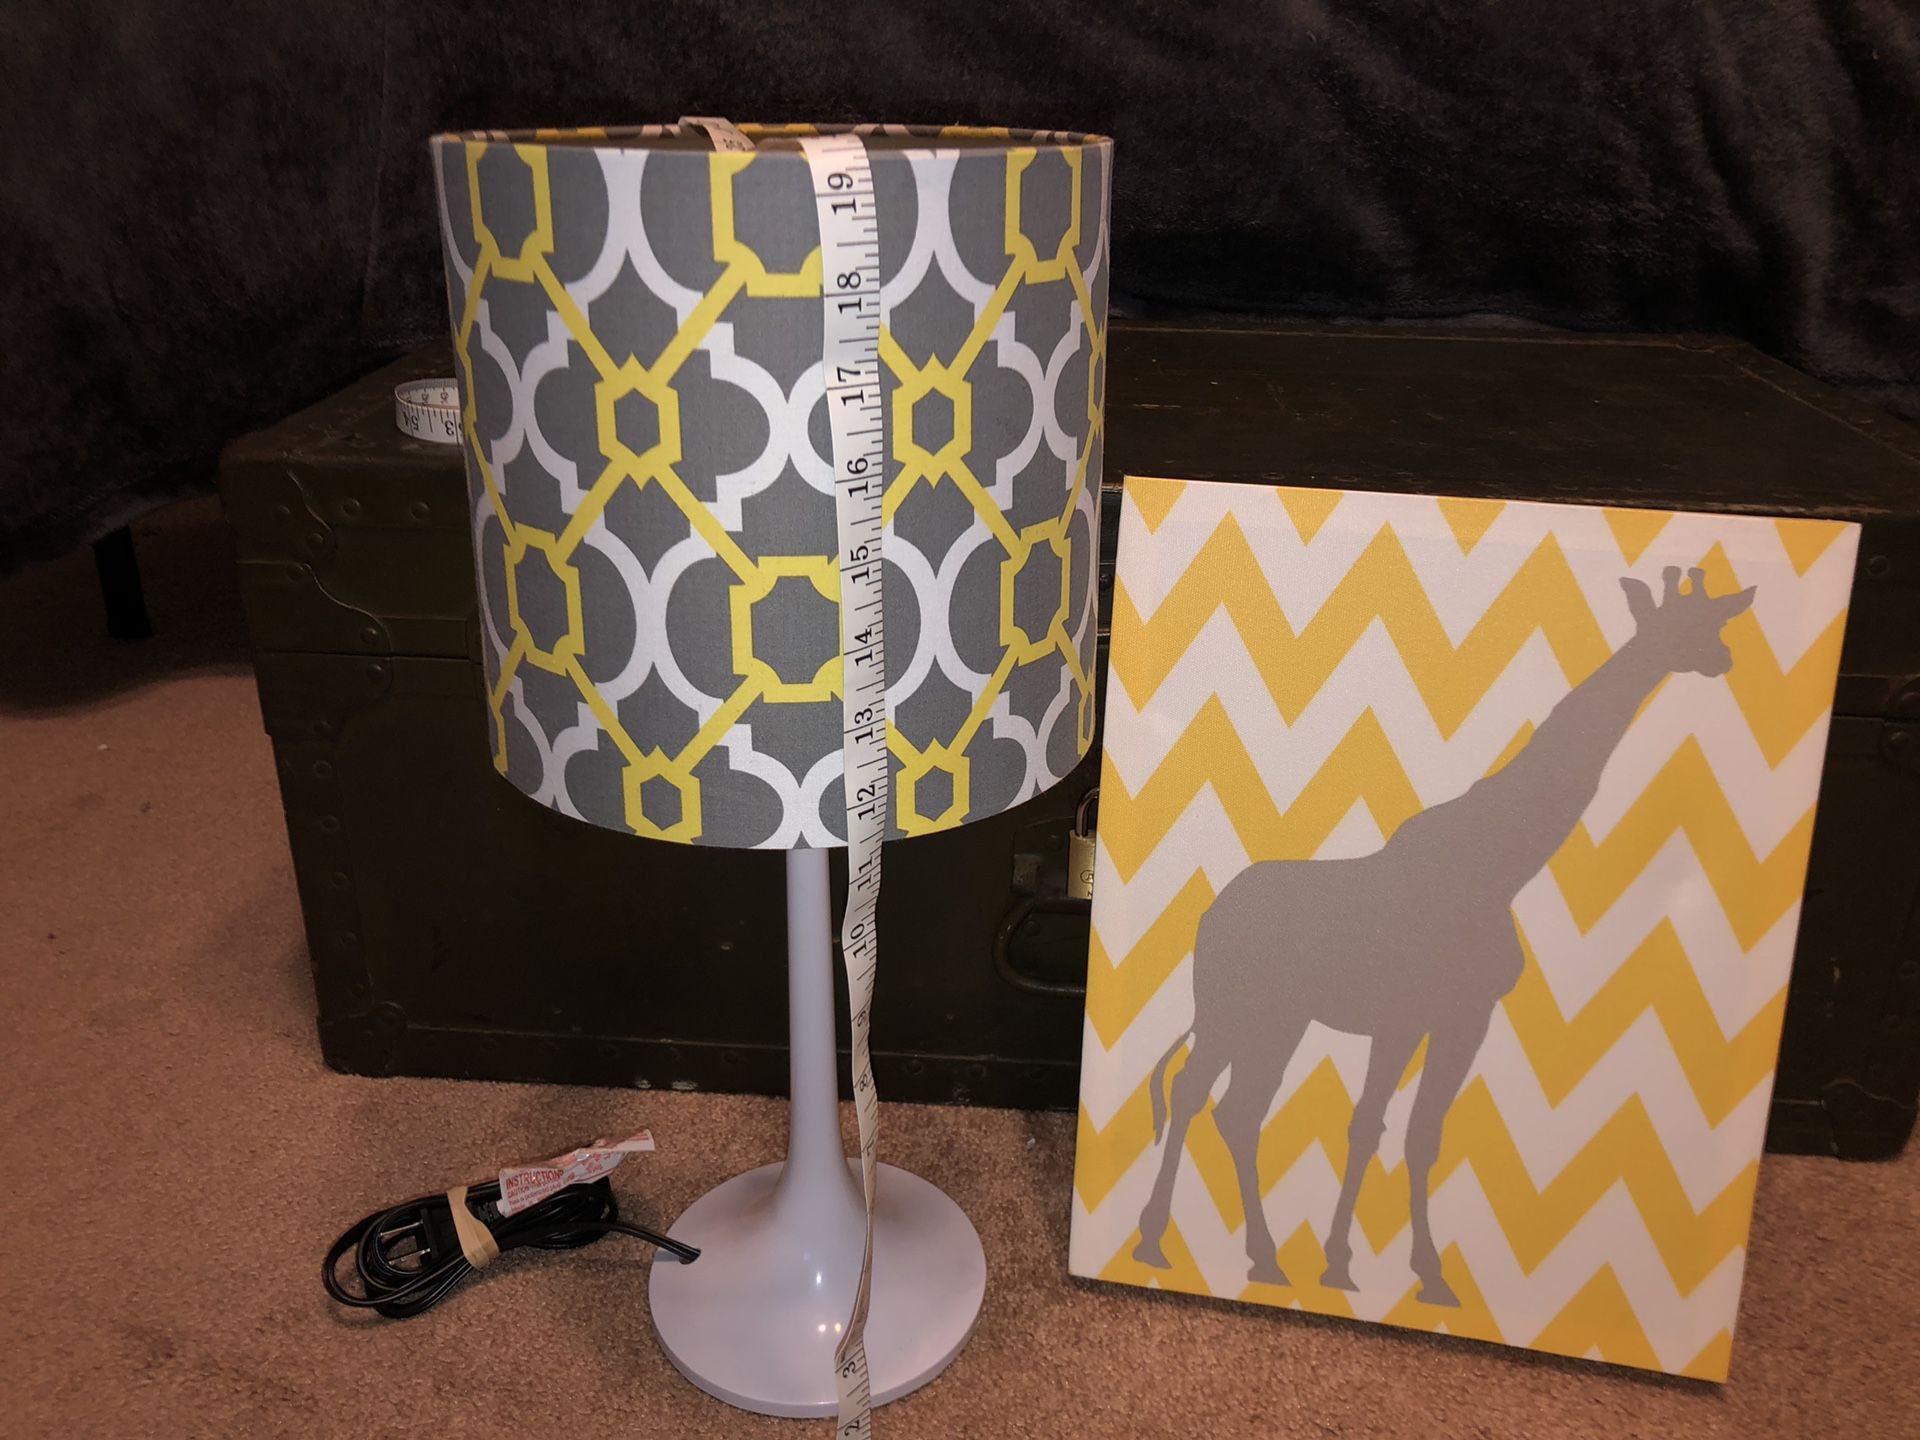 Lamp and giraffe picture